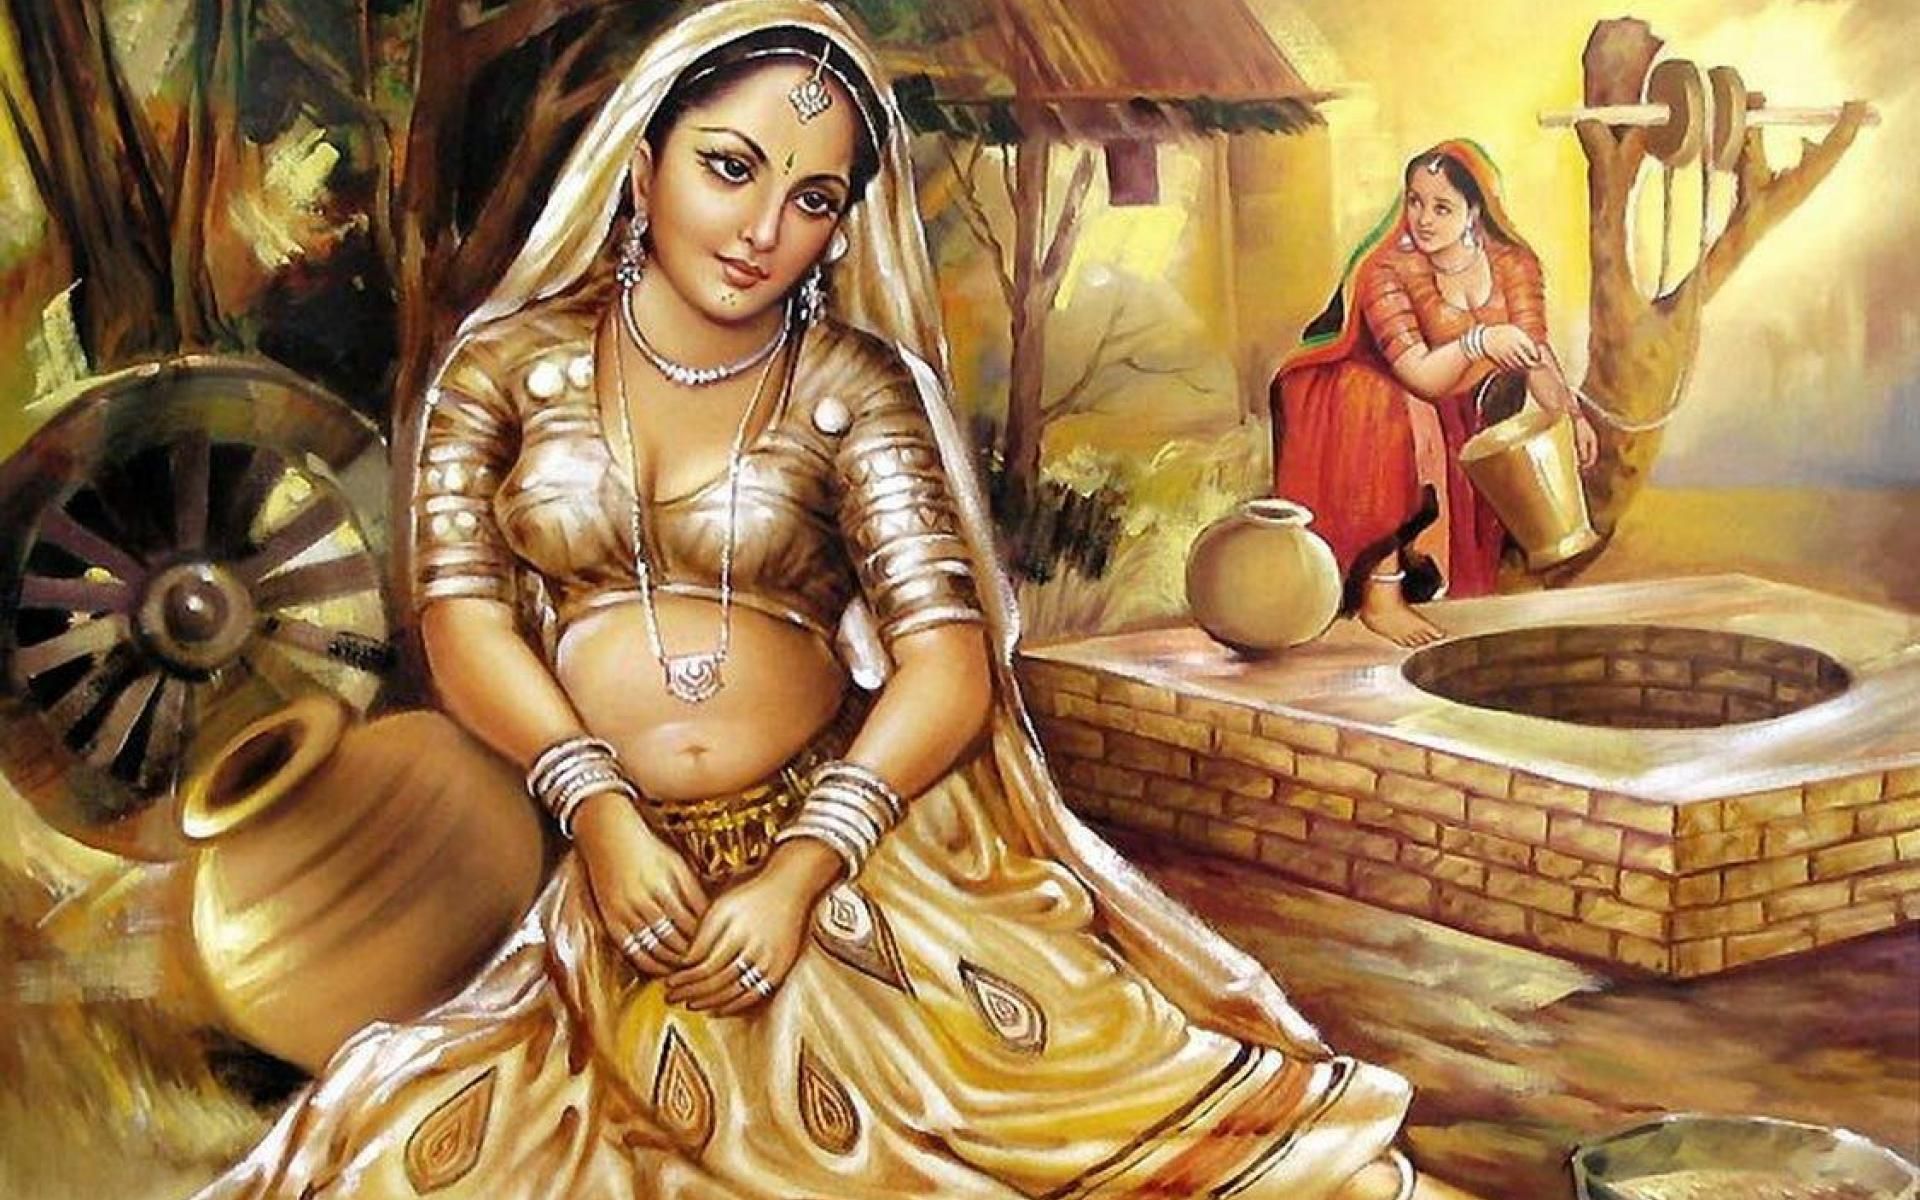 Woman Painting Of Indian Culture HD Wallpaper For Desktop. Indian artist, Indian paintings, Painting of girl